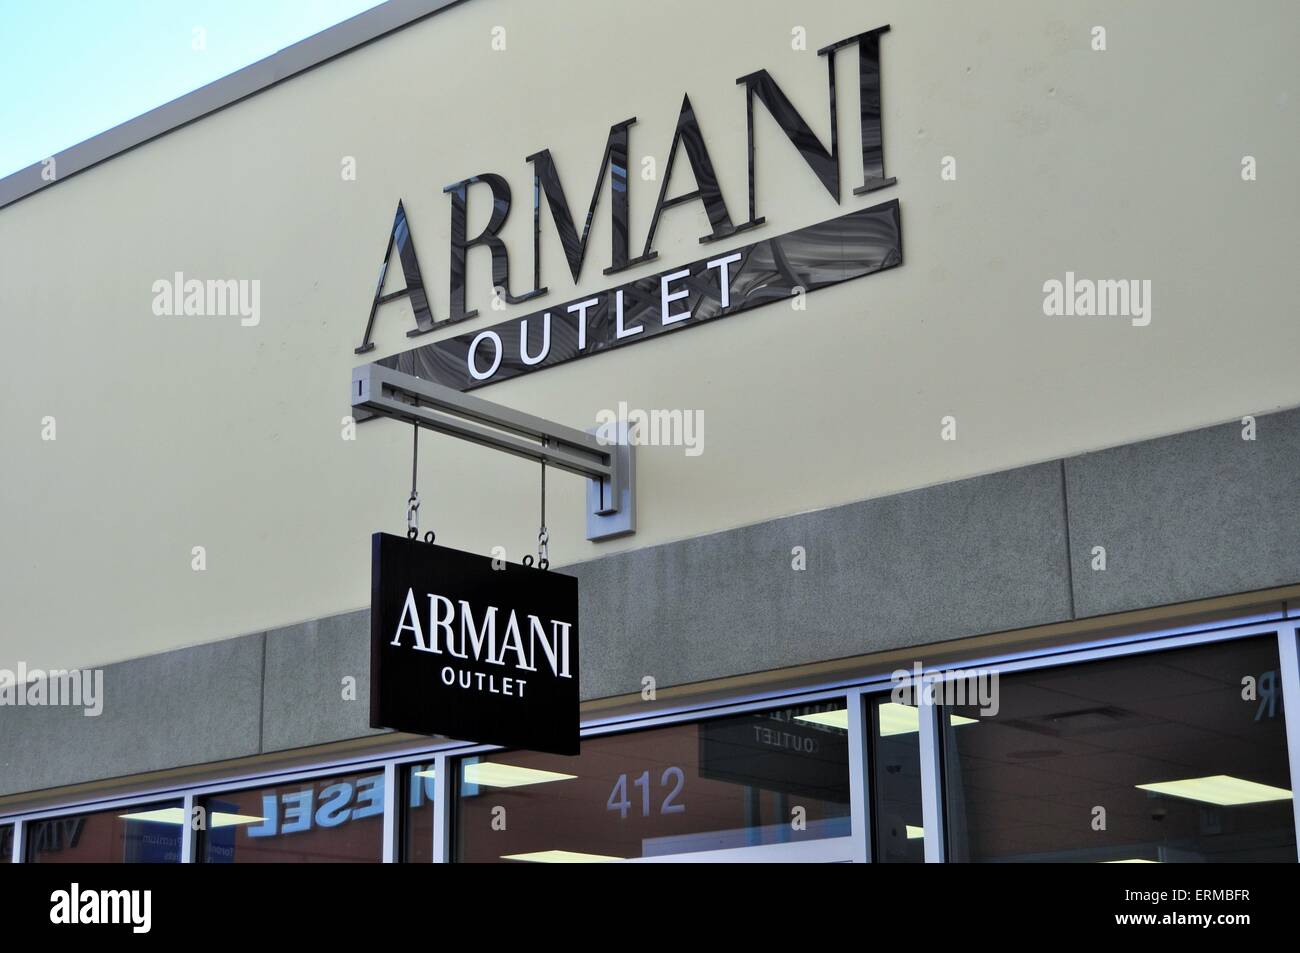 Armani outlet store front Stock Photo -